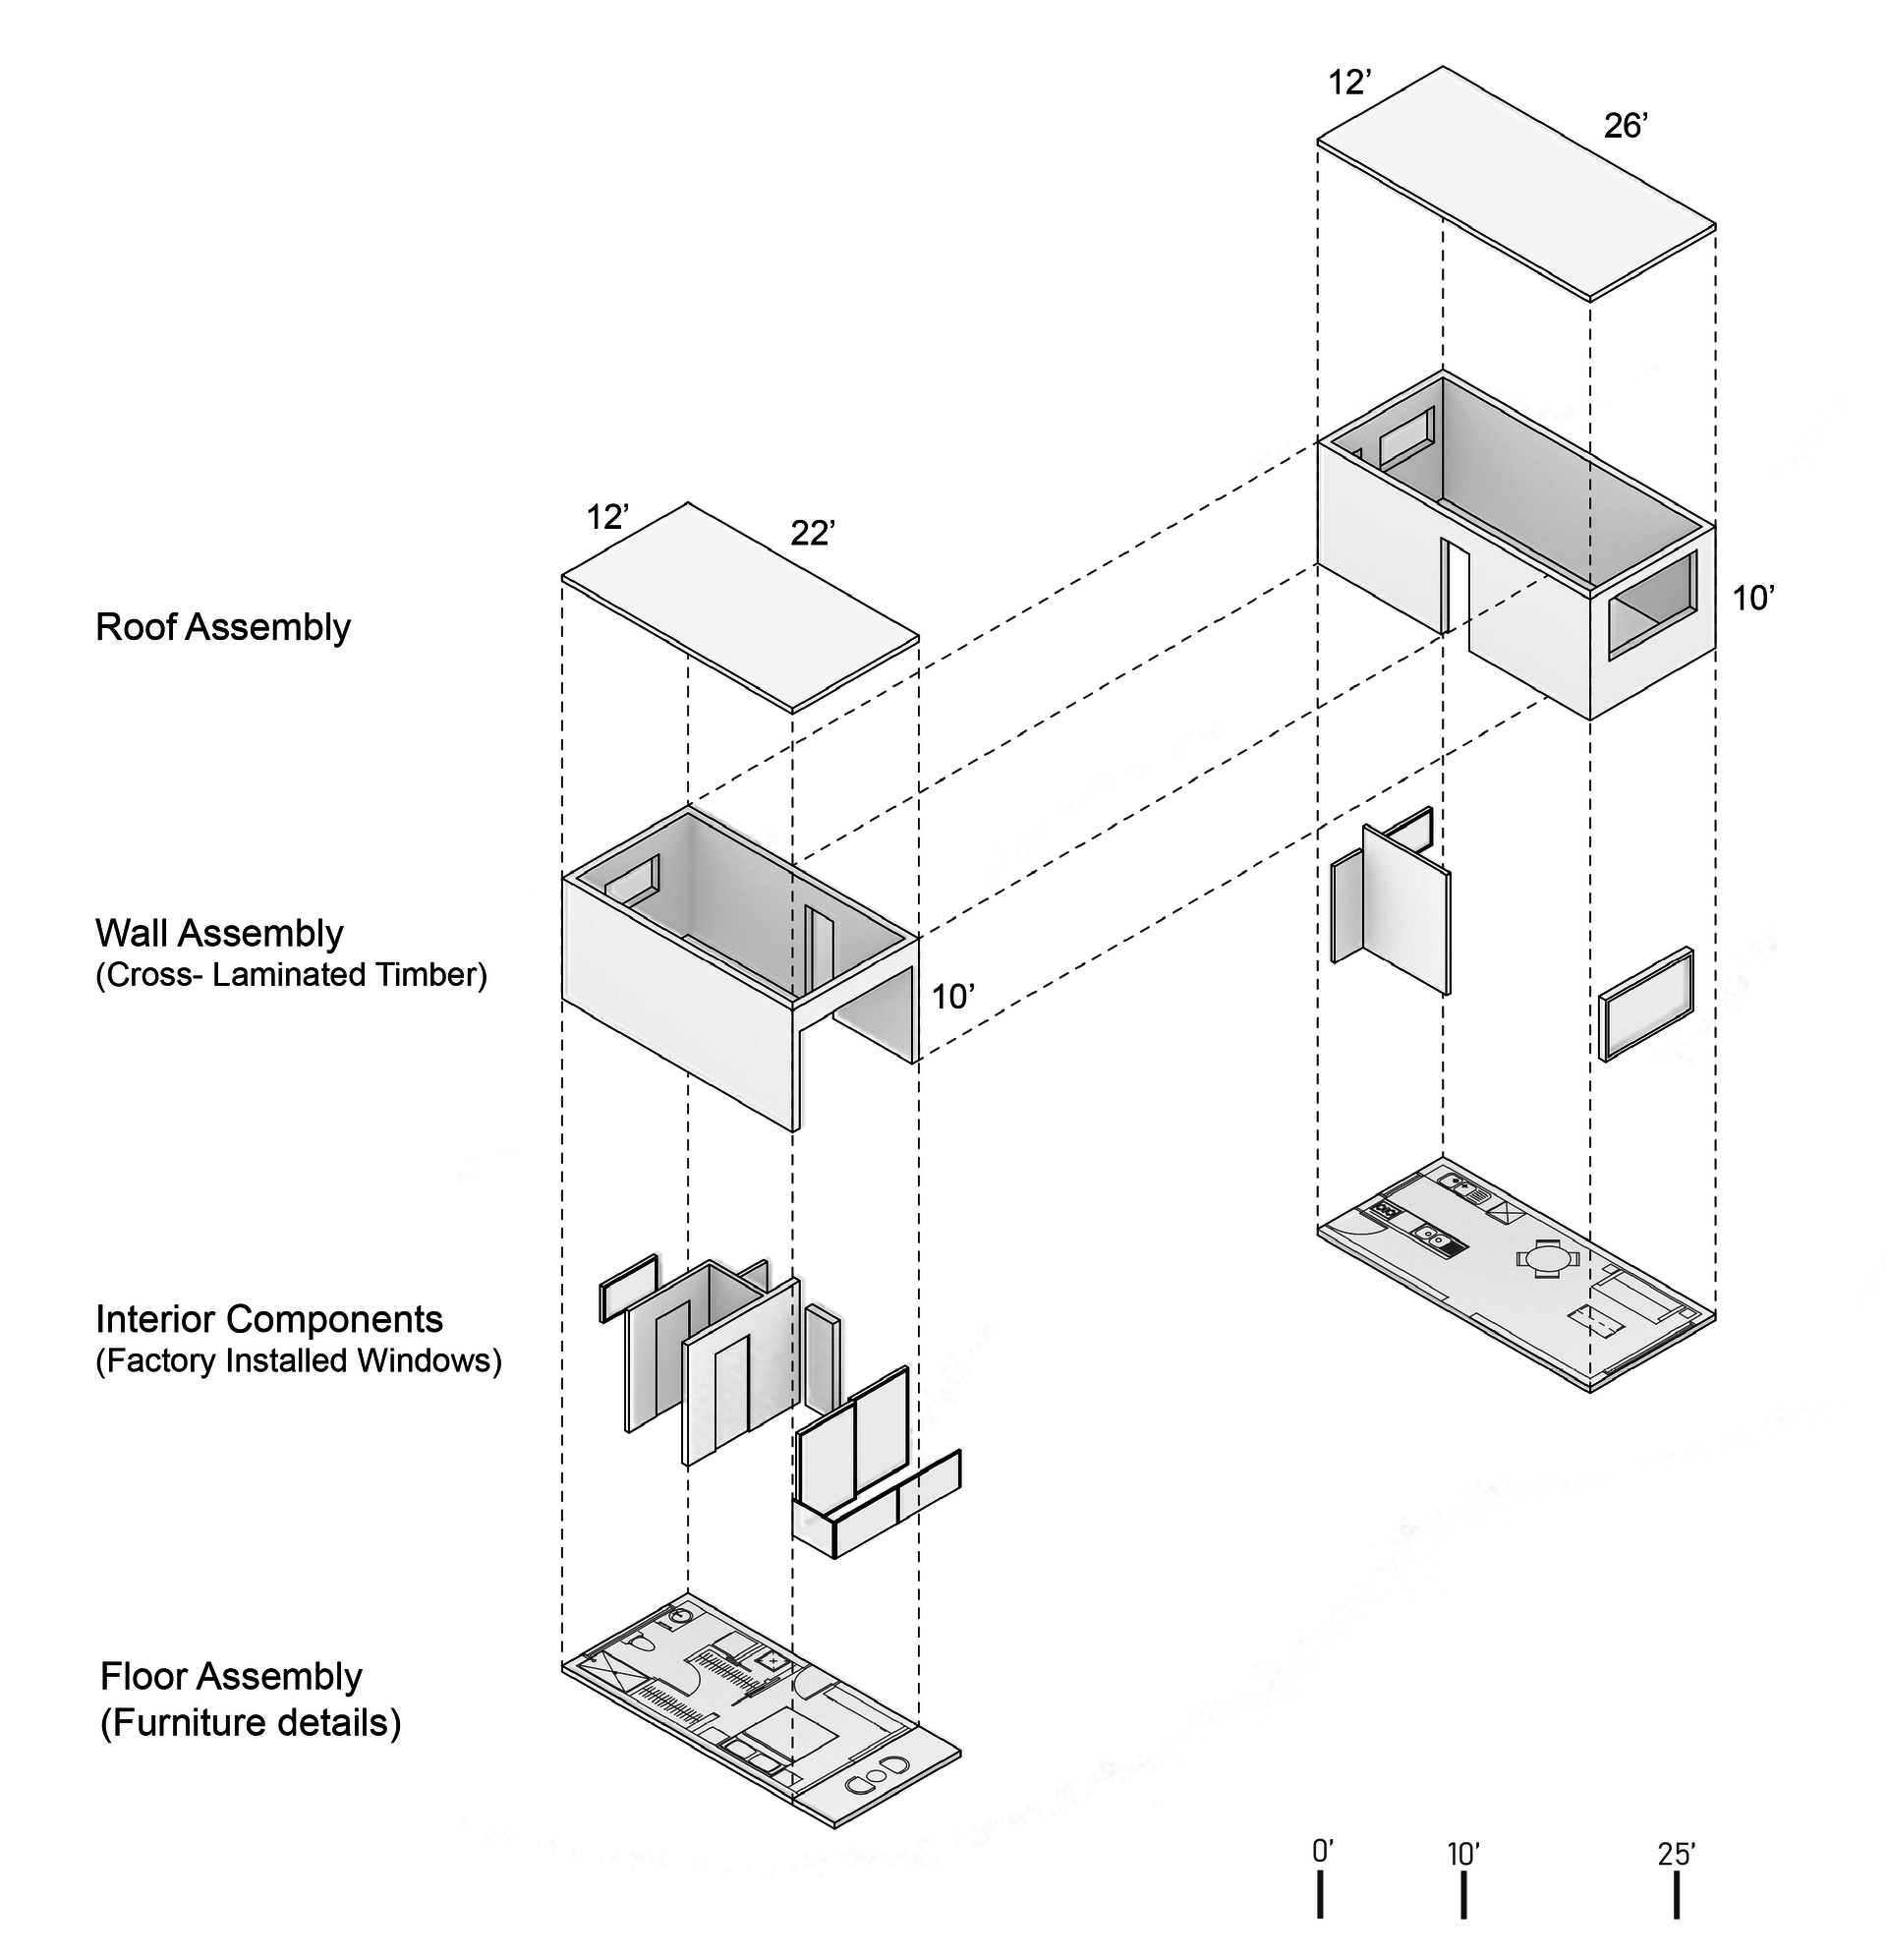 This diagram explains how the prefabricated unit comes together and each of its components. 